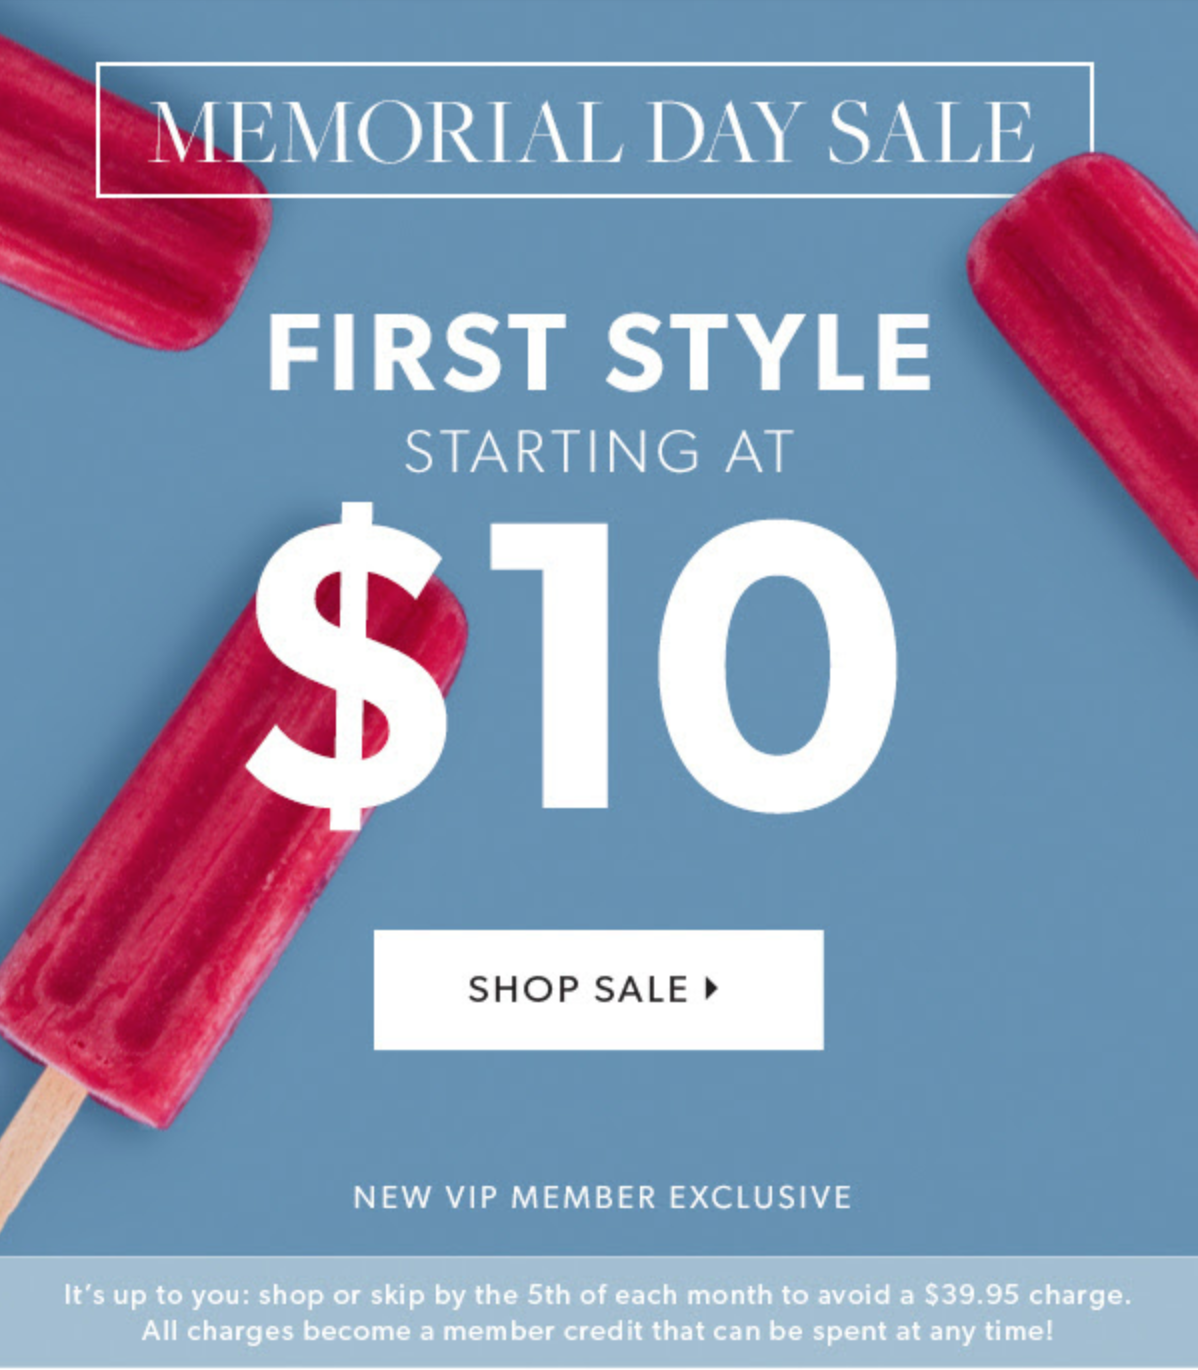 JustFab Memorial Day Offer – First Style for $10!